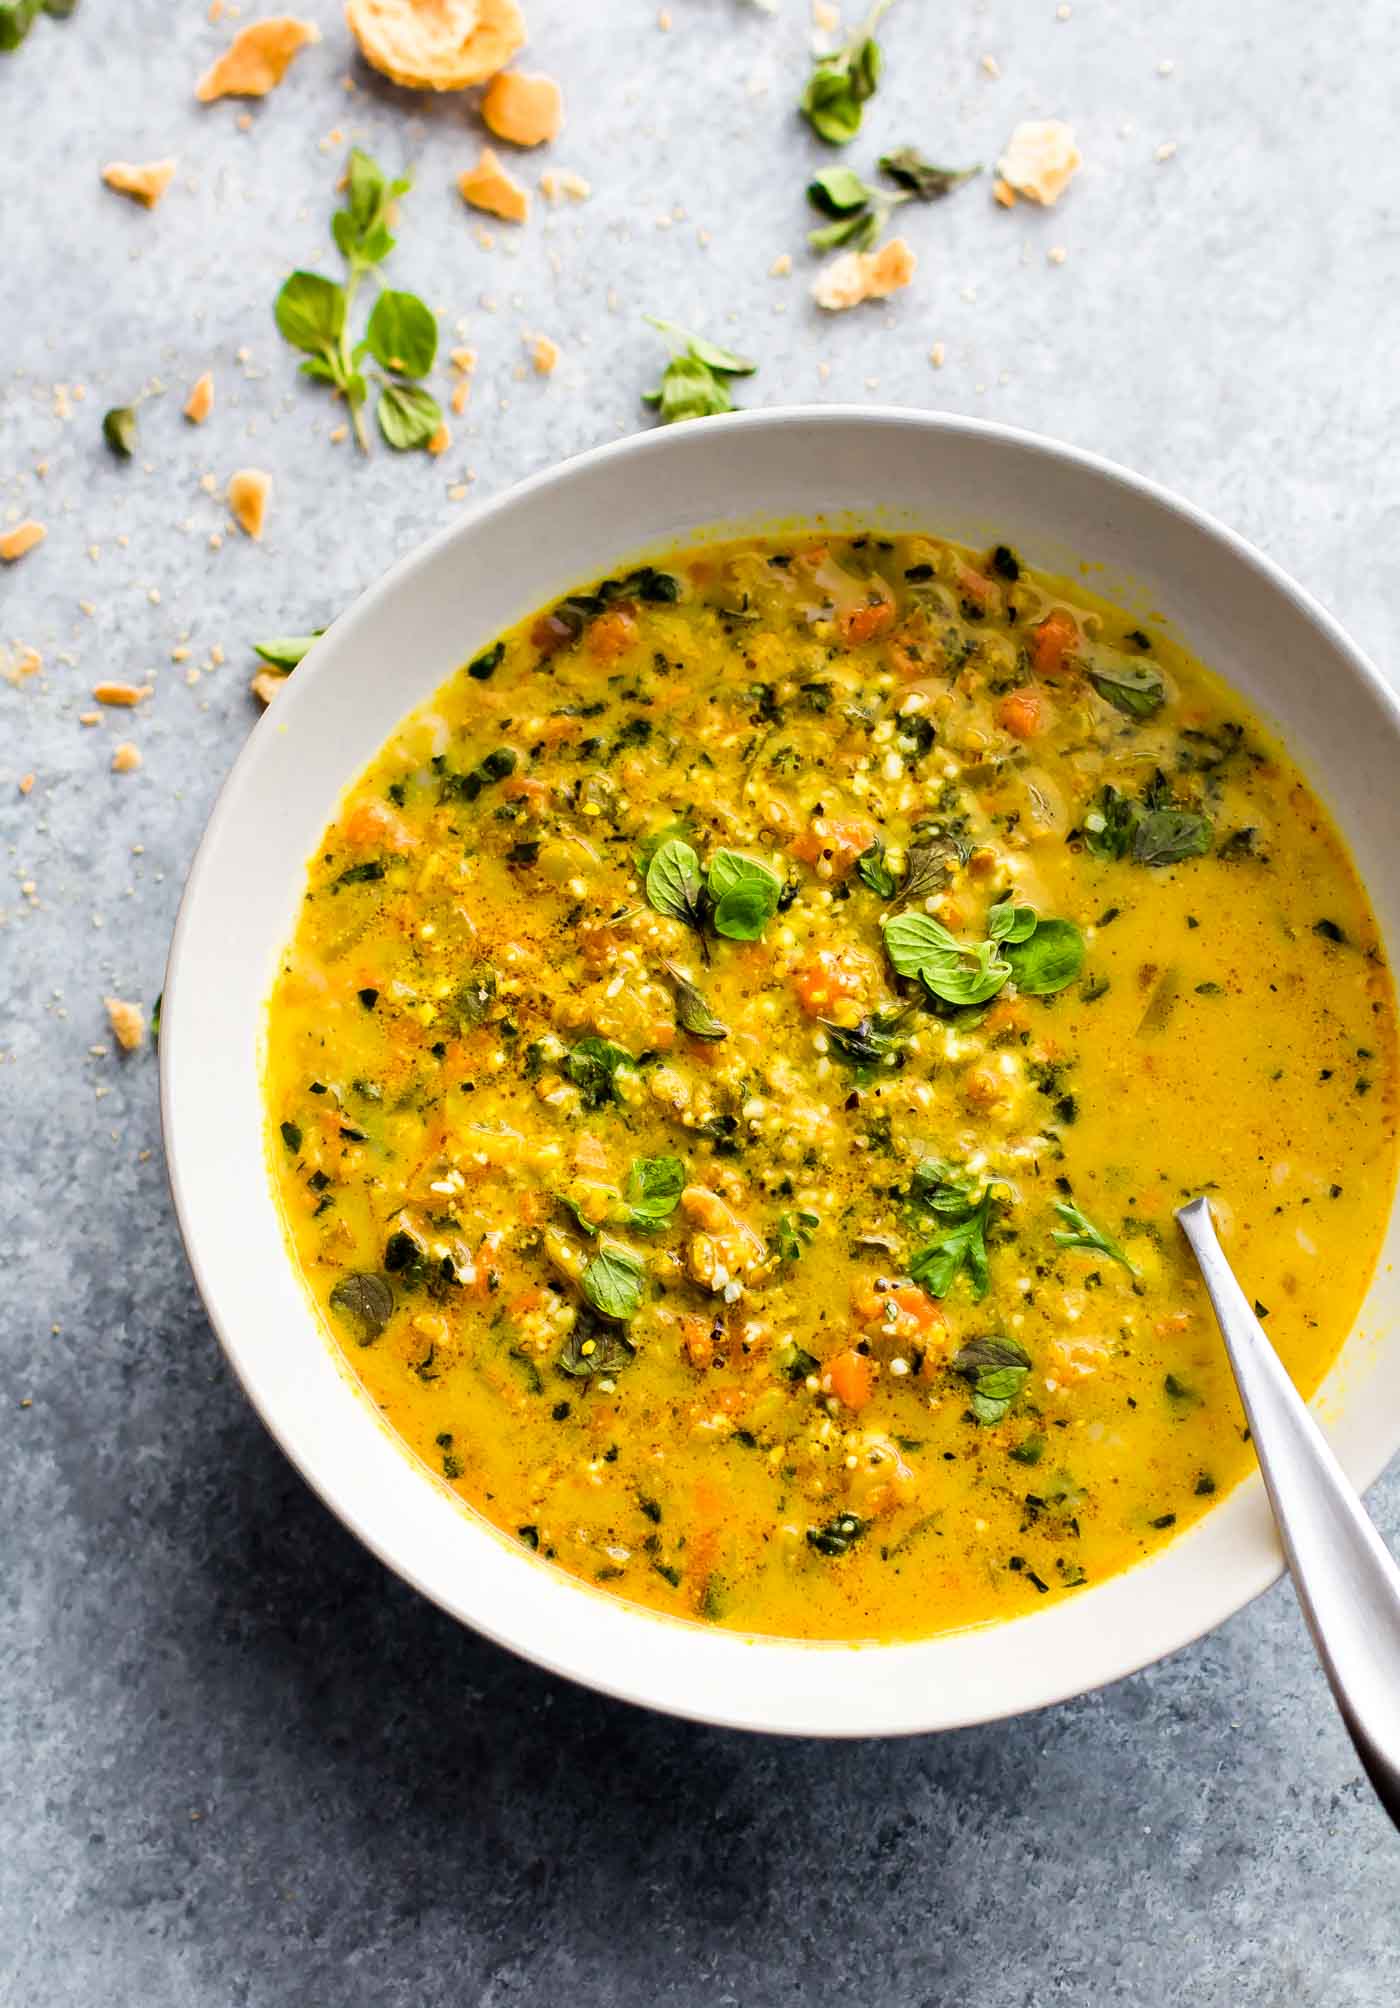 Vegan Kale Soup with Curried Vegetables} | Cotter Crunch